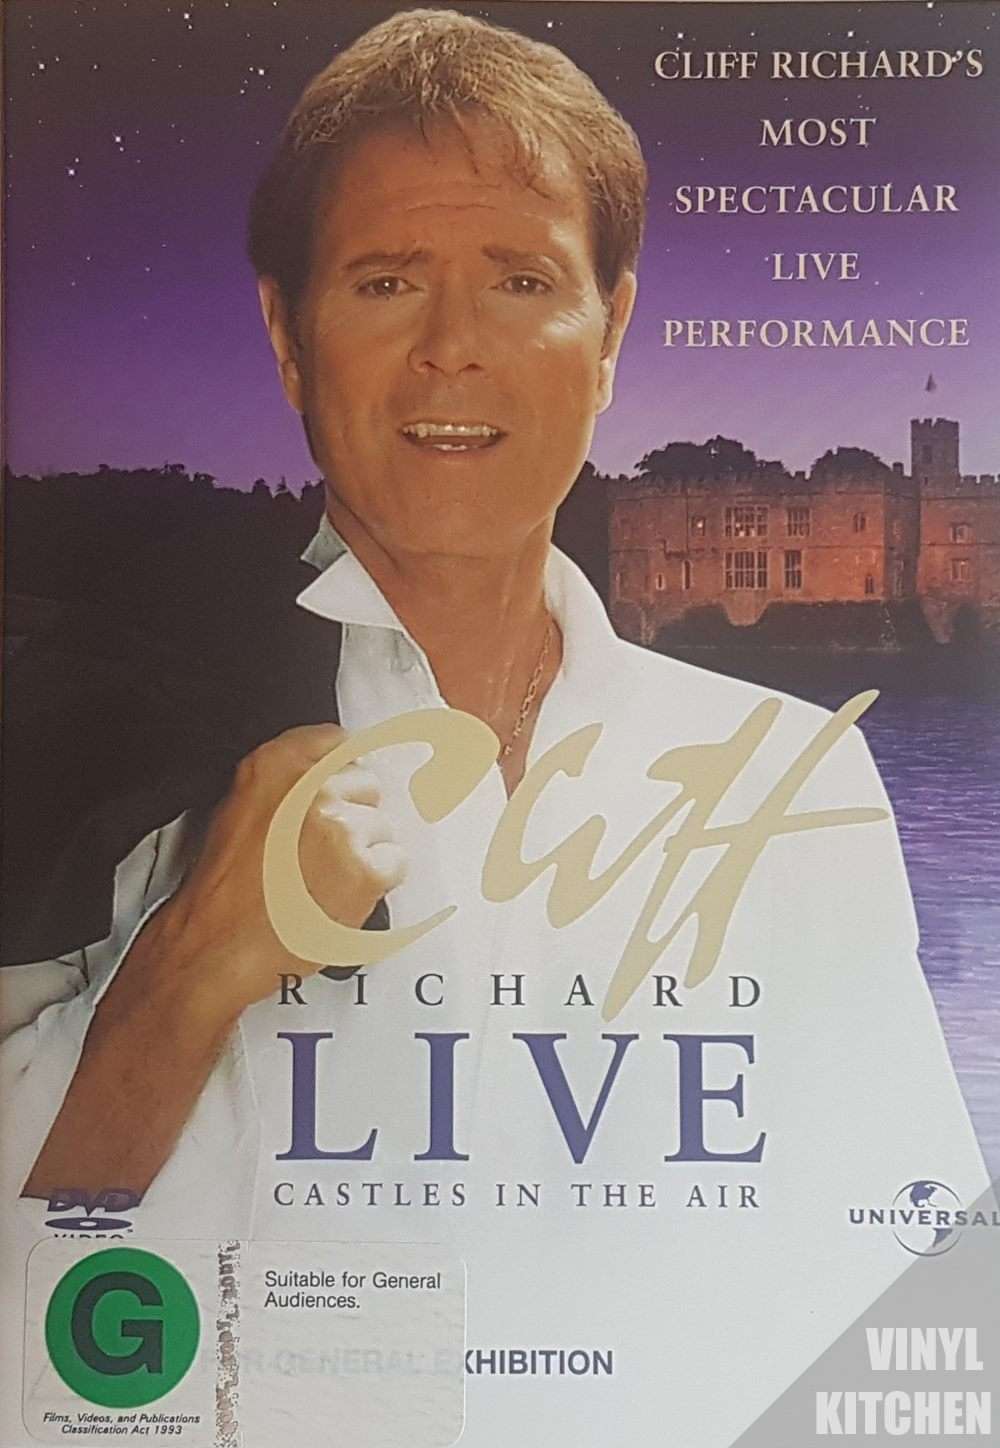 Cliff Richard: Live - Castles in the Air